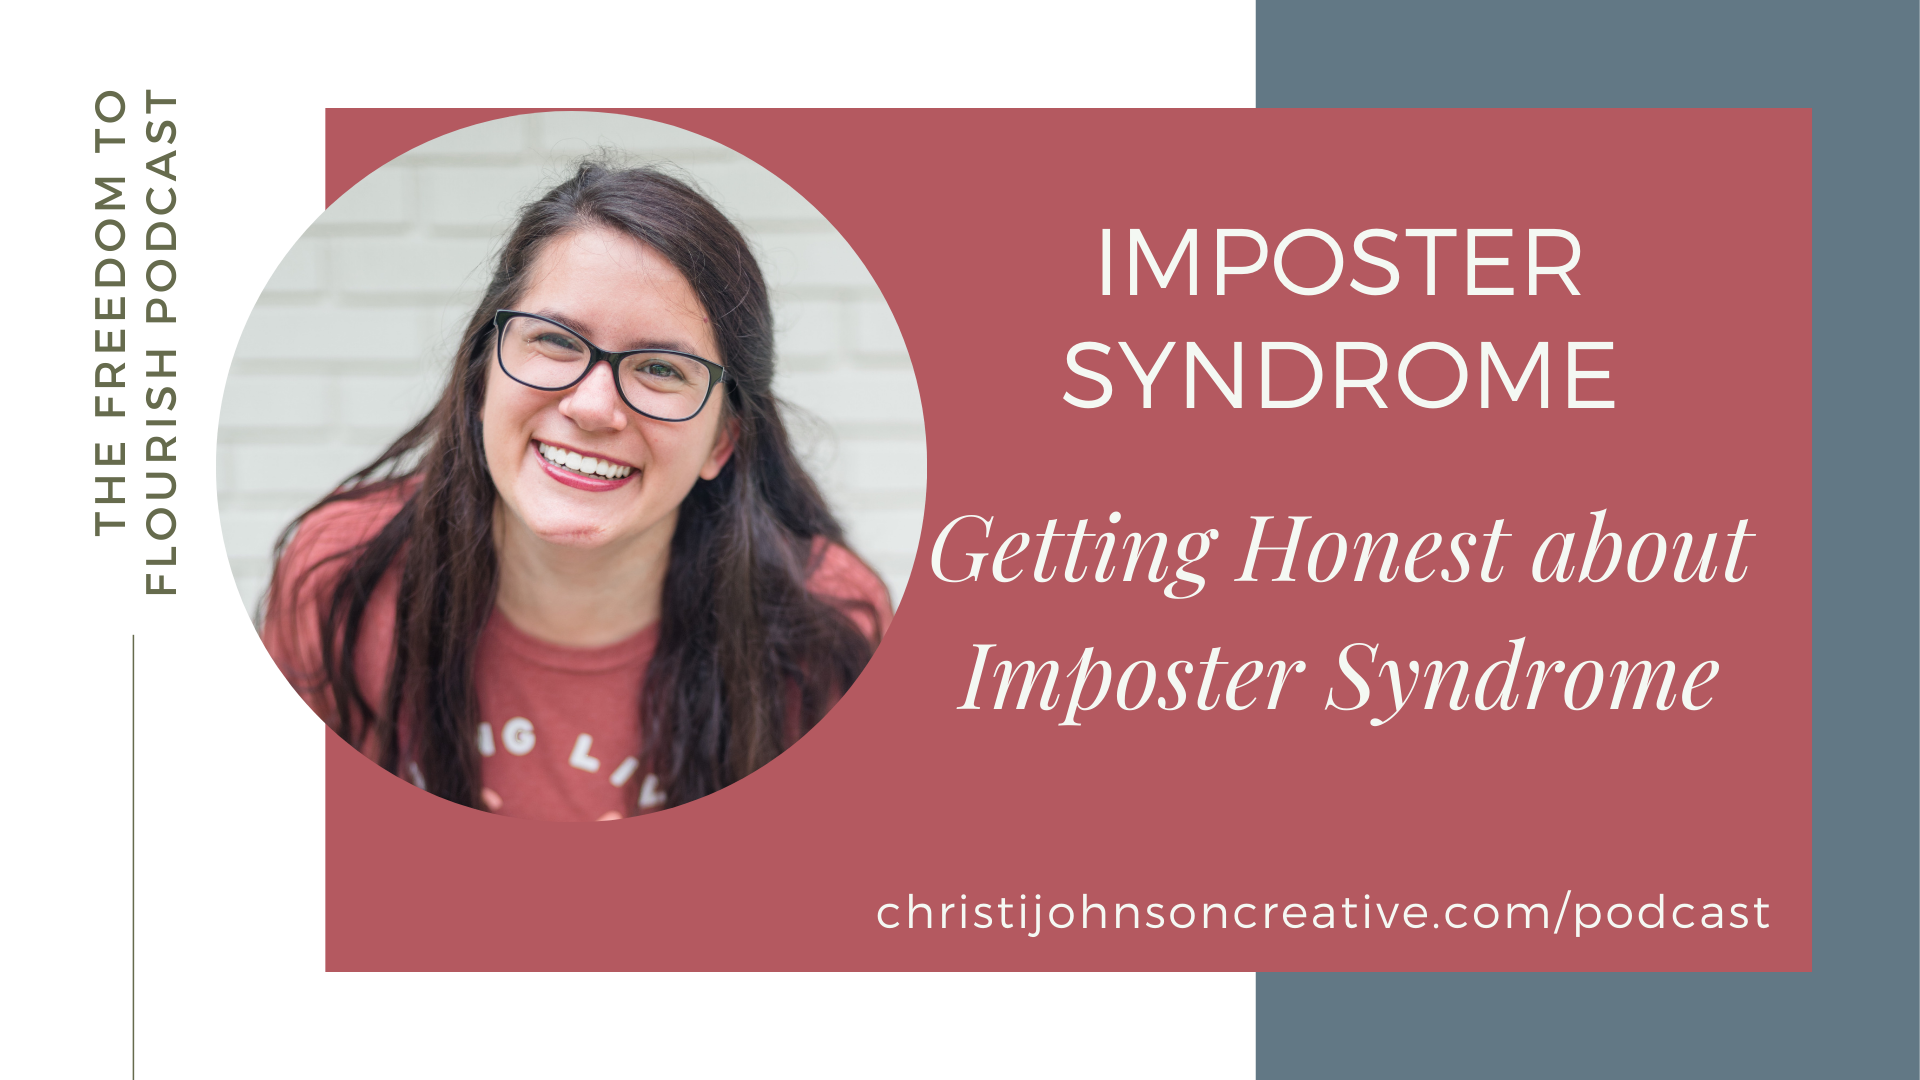 Getting Honest About Imposter Syndrome